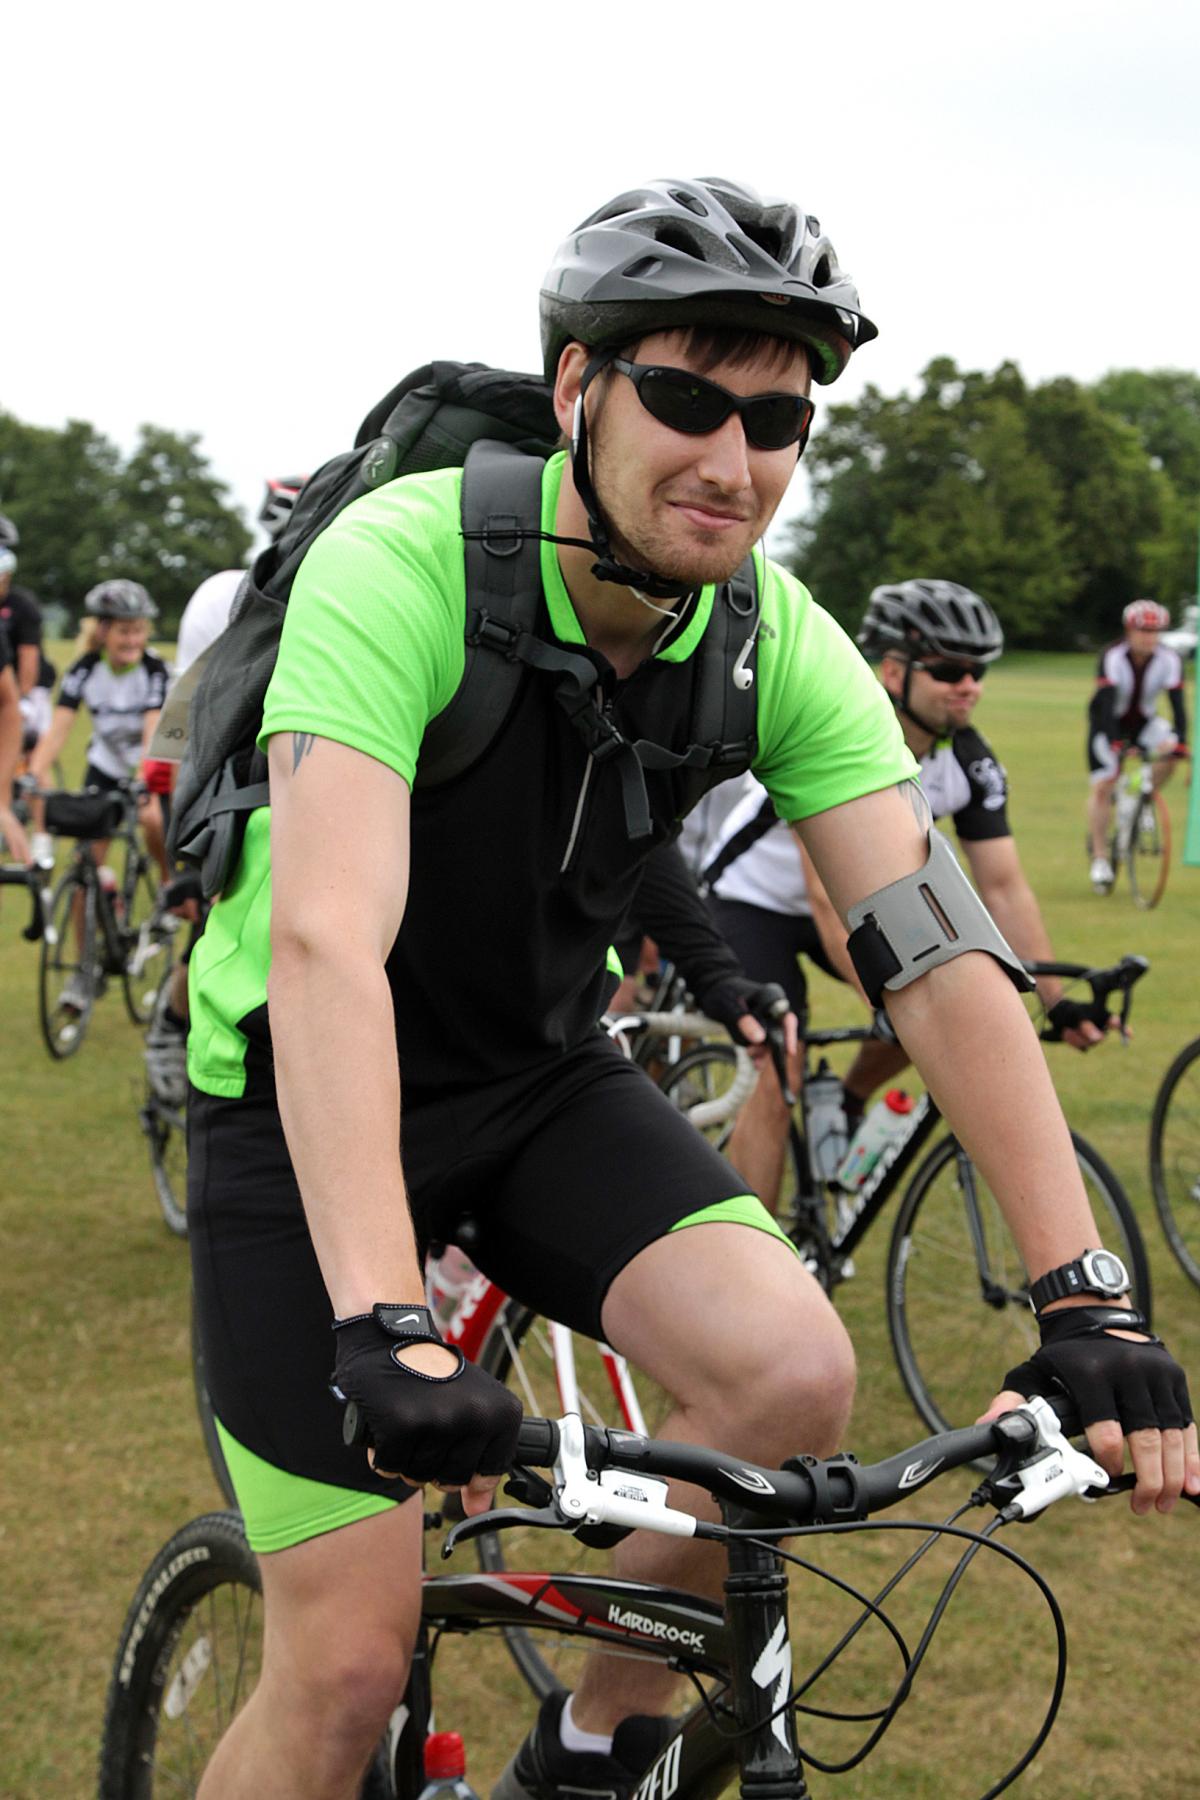 All our pictures of the Macmillan Dorset Bike Ride 2014